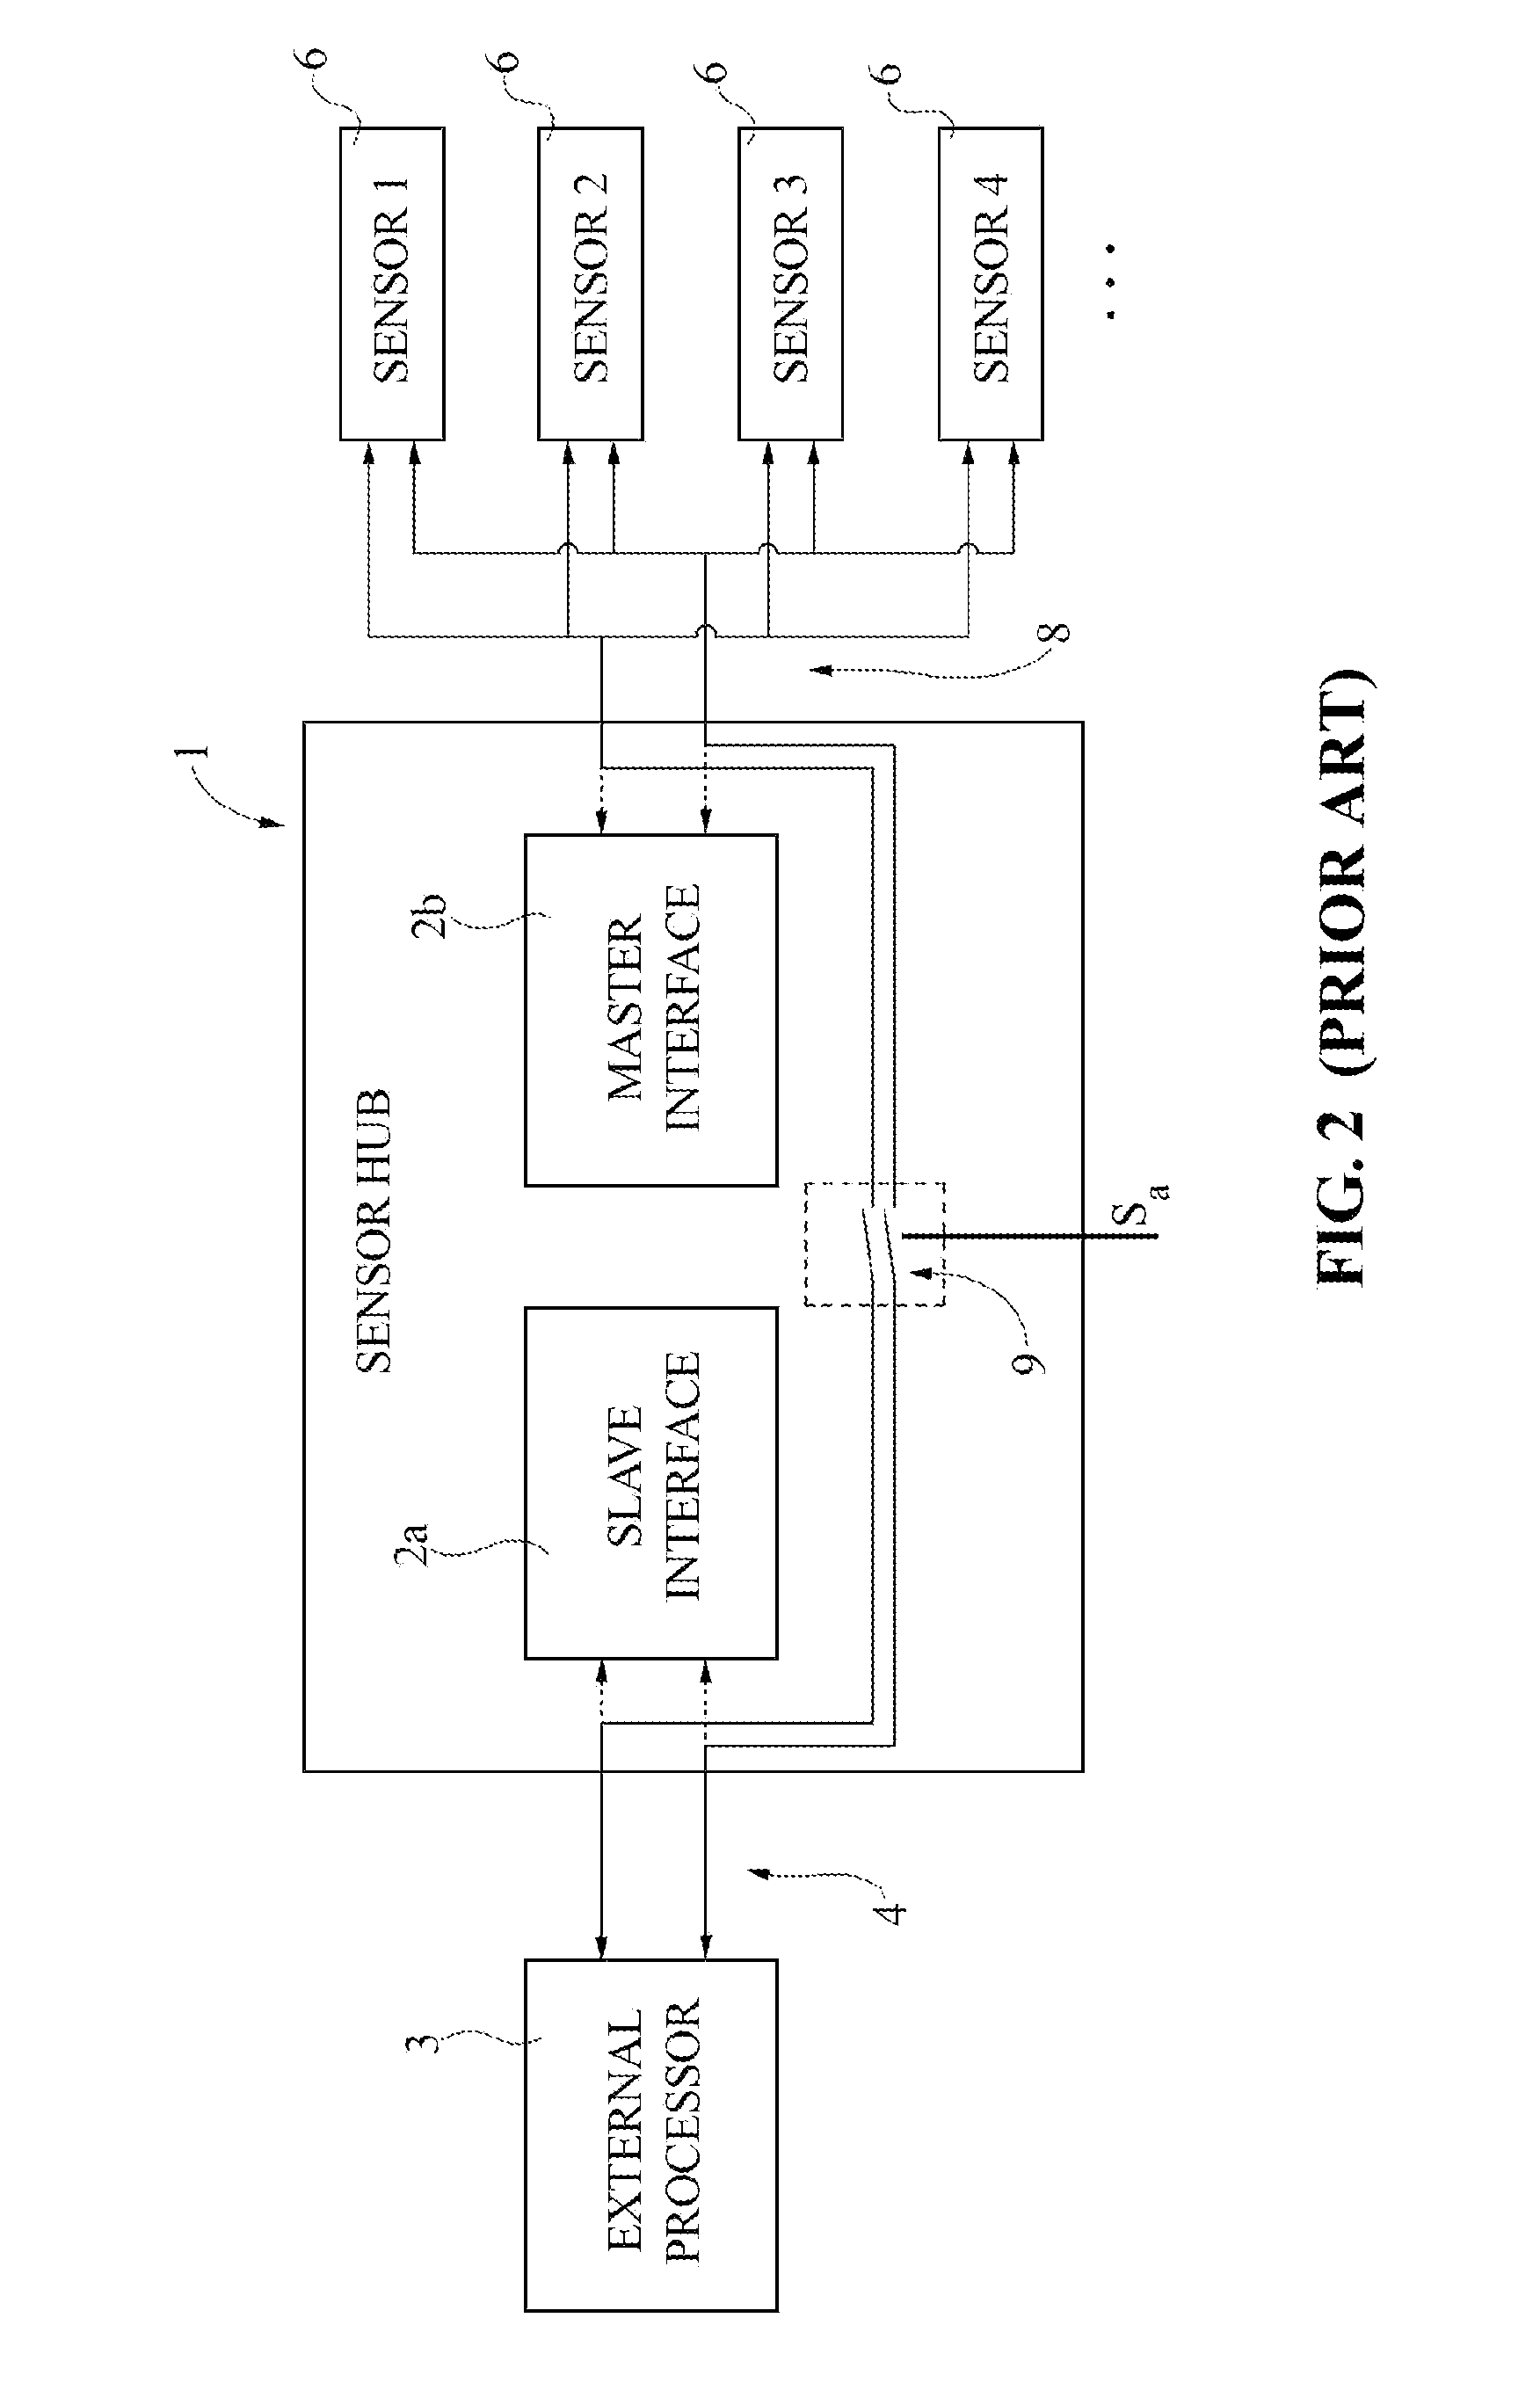 Integrated data concentrator for multi-sensor MEMS systems